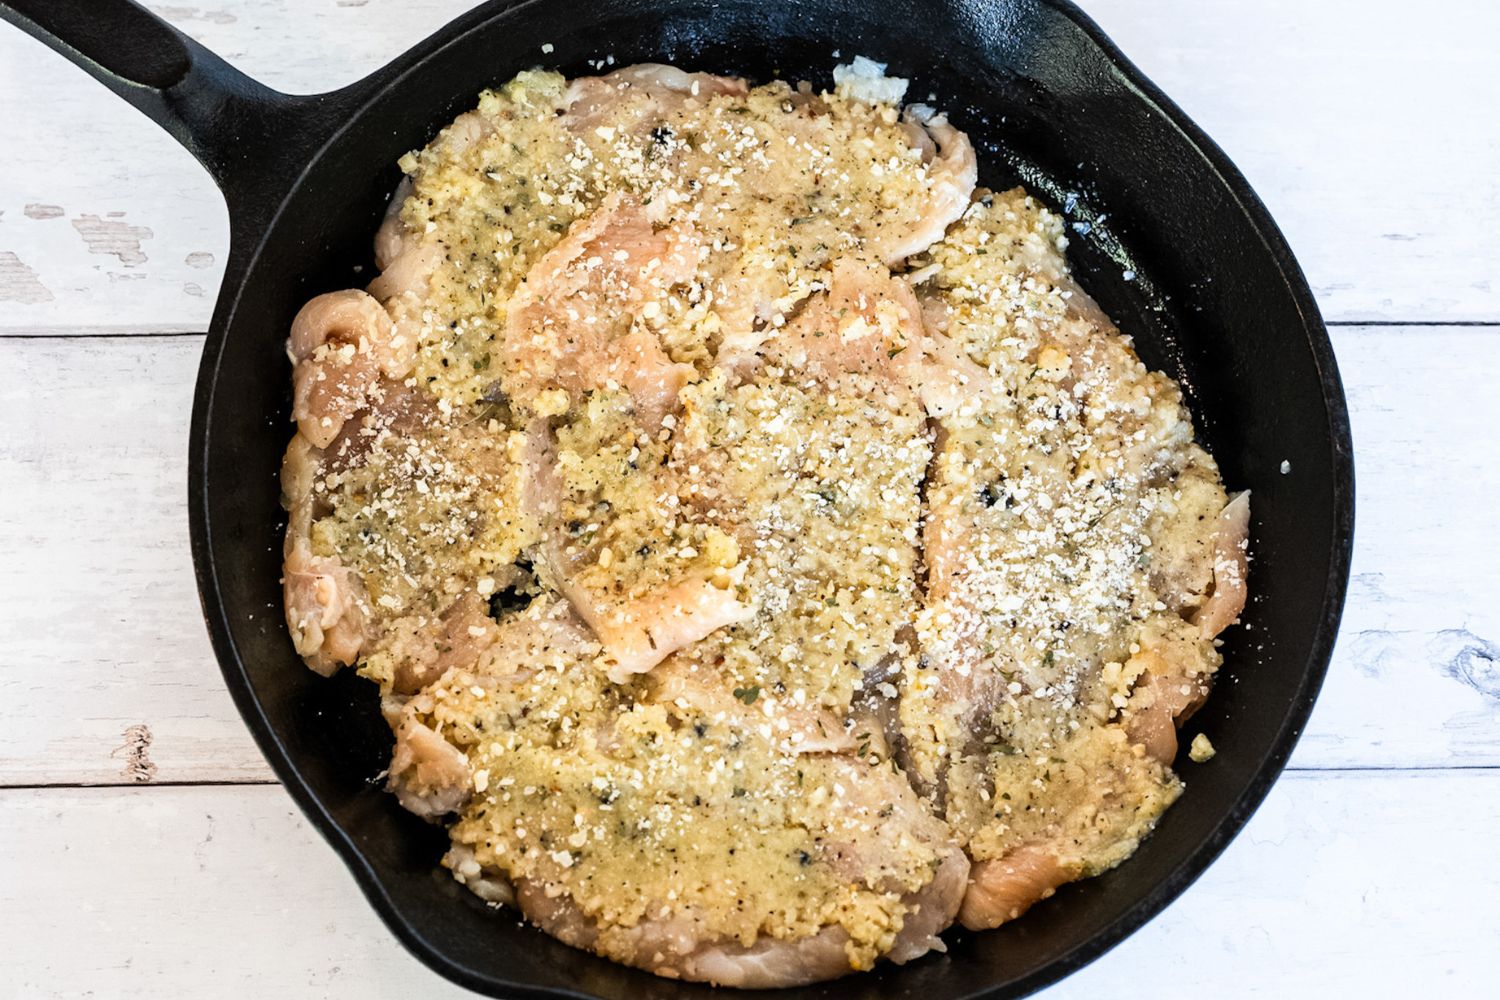 Raw chicken cutlets seasoned with a garlic and parmesan mixture, arranged in a cast iron skillet before baking in the oven.